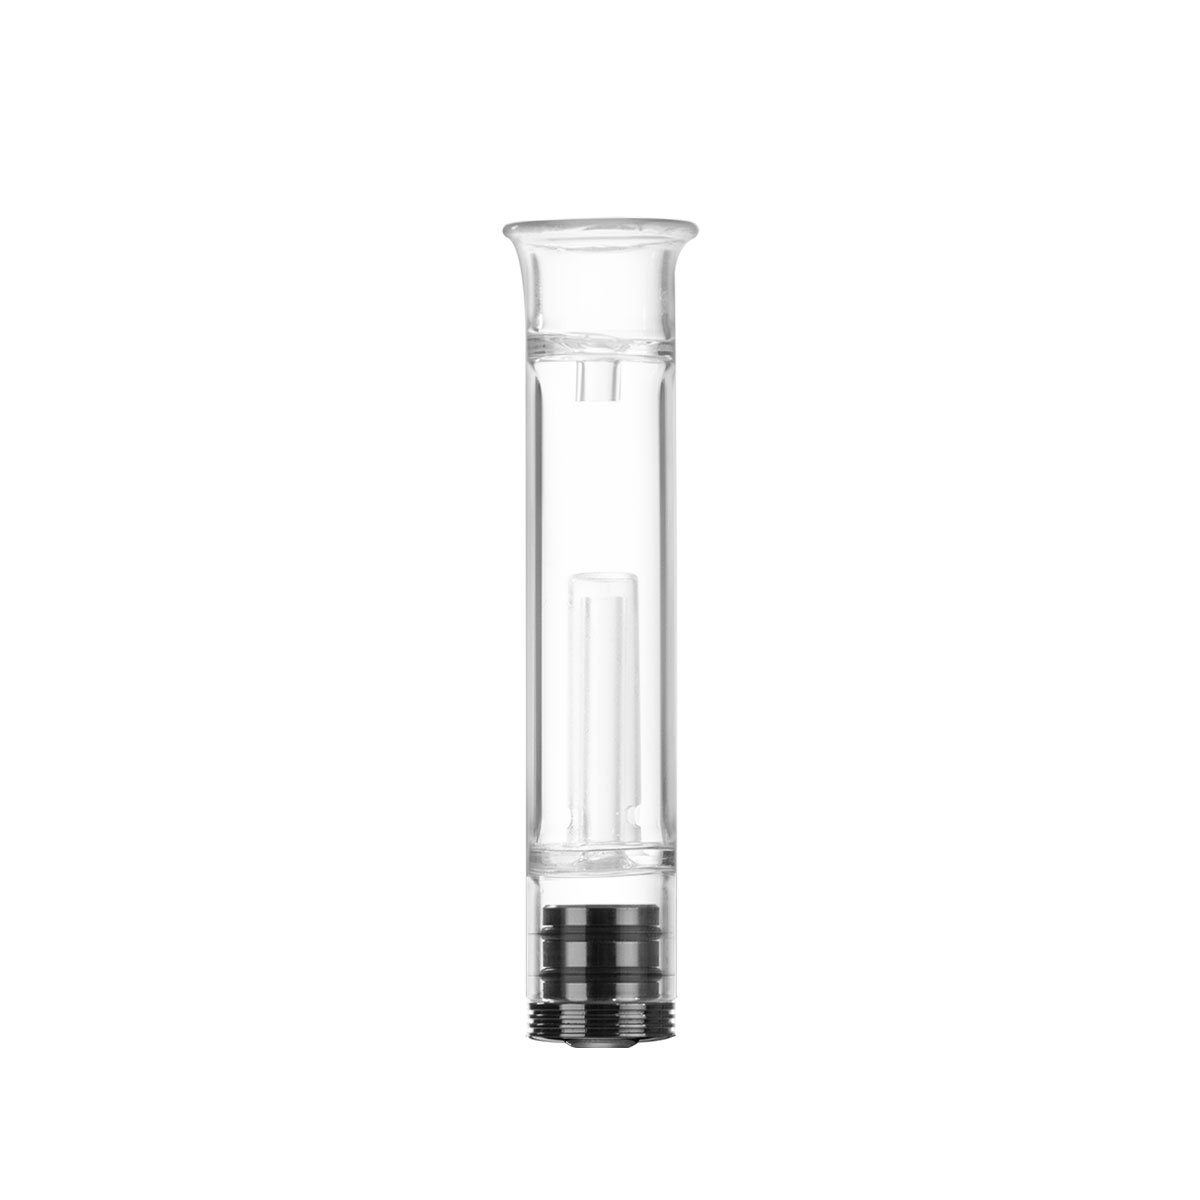 Cipher NOVA electronic smoking pipe water bubbler attachment for extra smooth water cooled hits